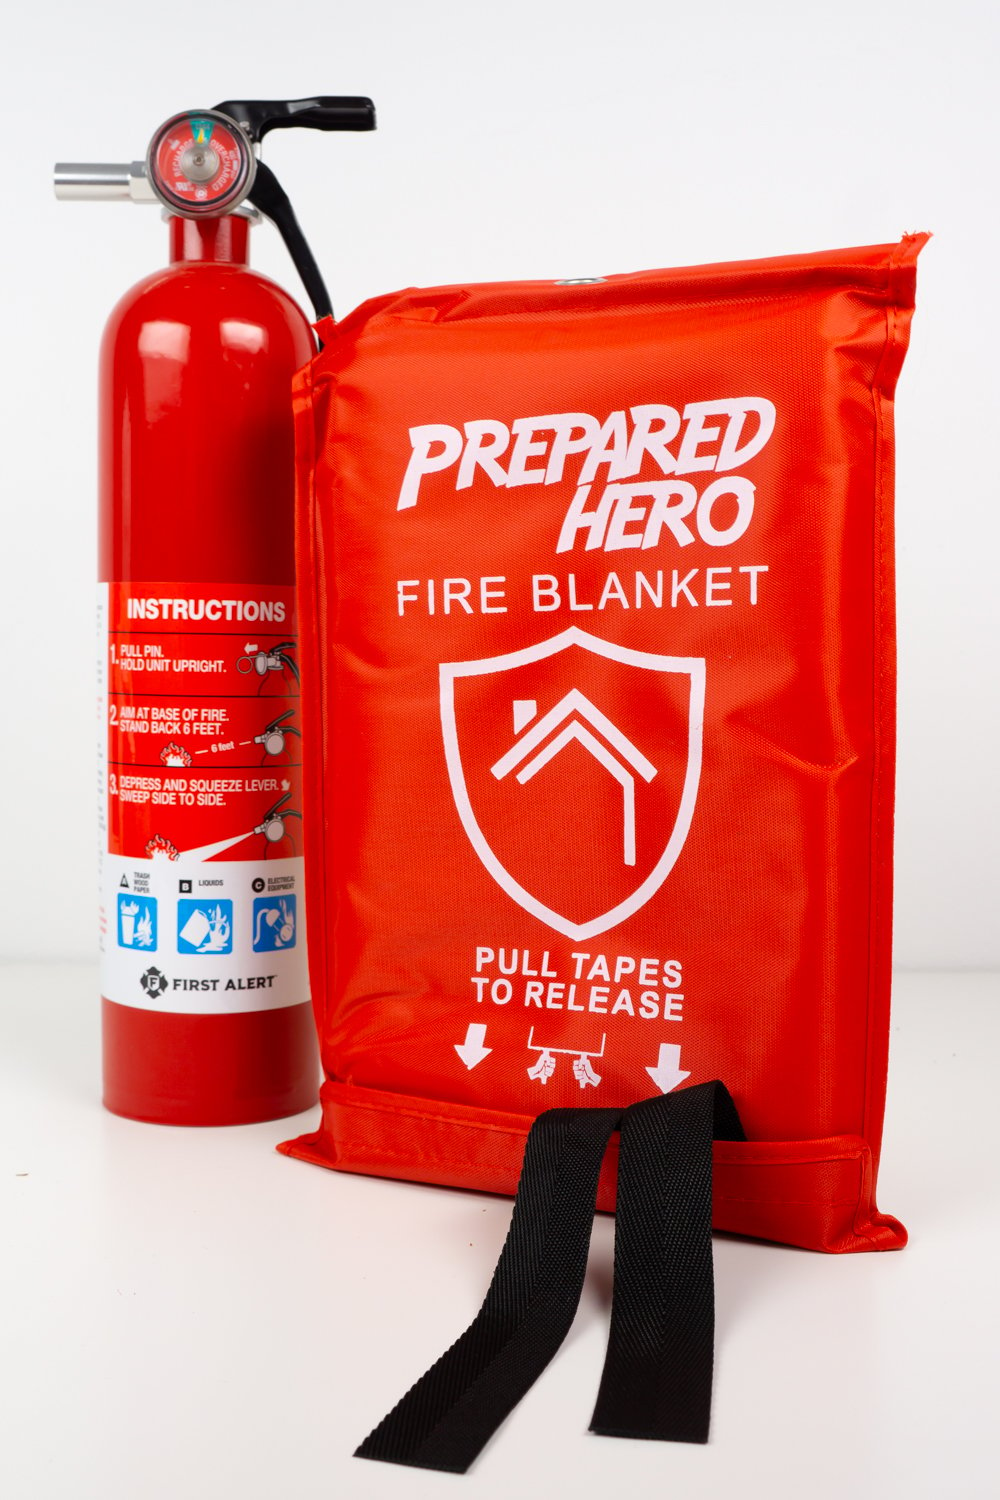 Fire extinguisher and fire blanket